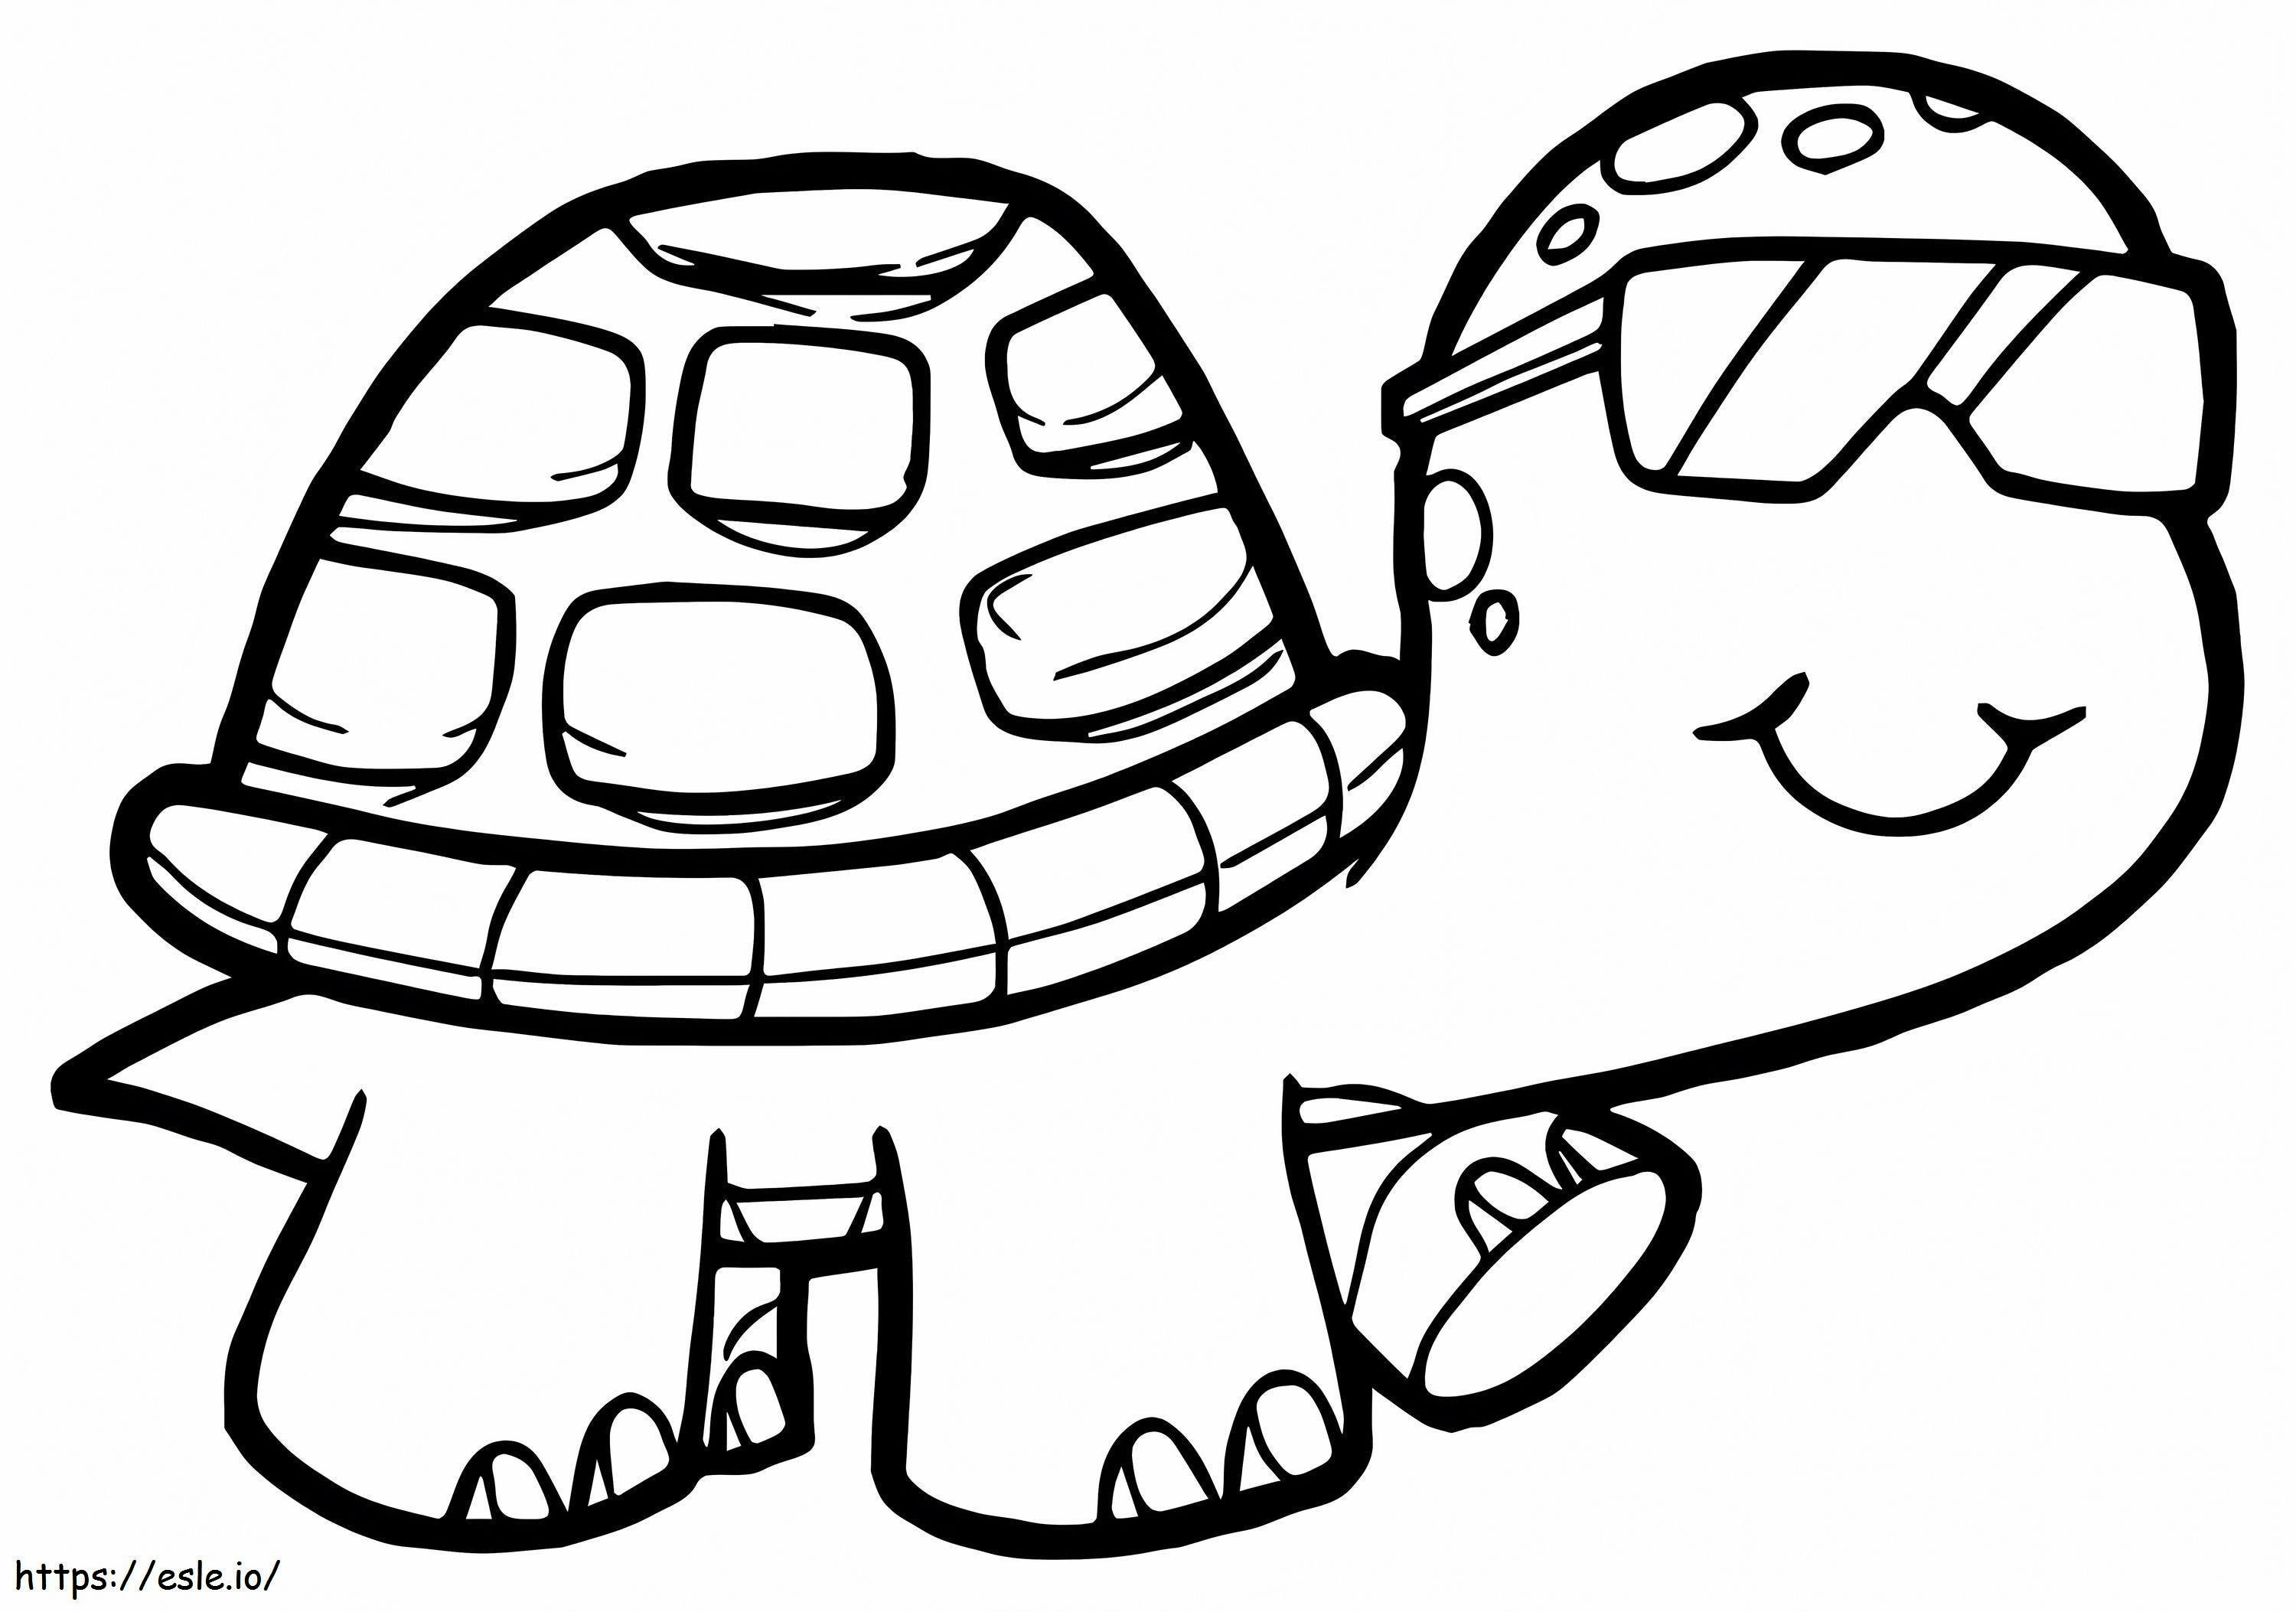 Turtle Boy coloring page